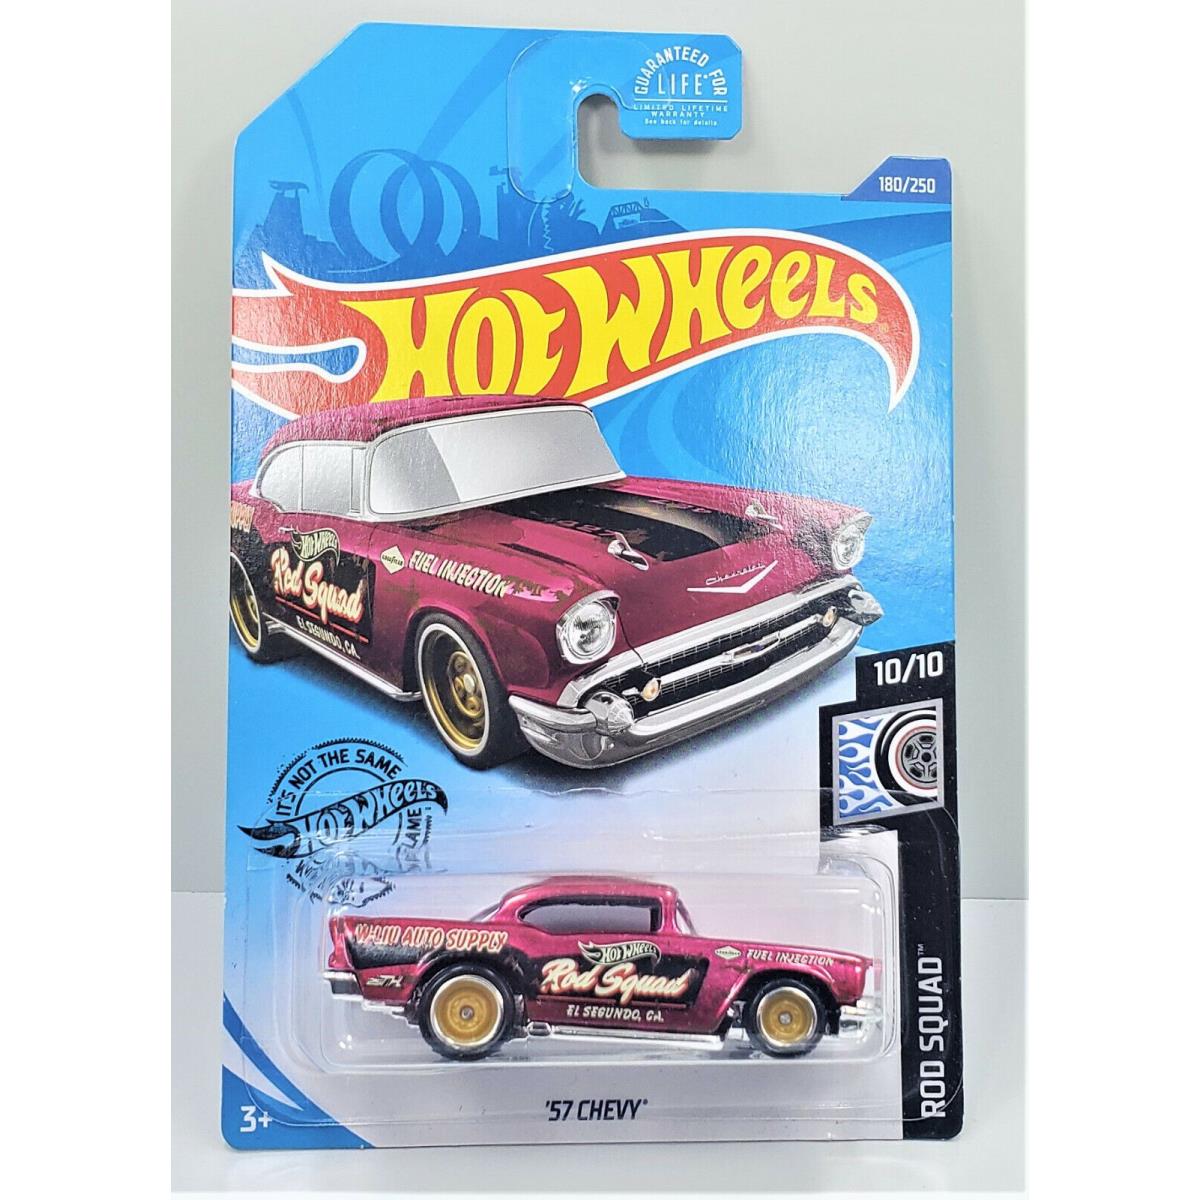 Hot Wheels `57 Chevy Rod Squad 180/250 10/10 Super Treasure Hunt In Package